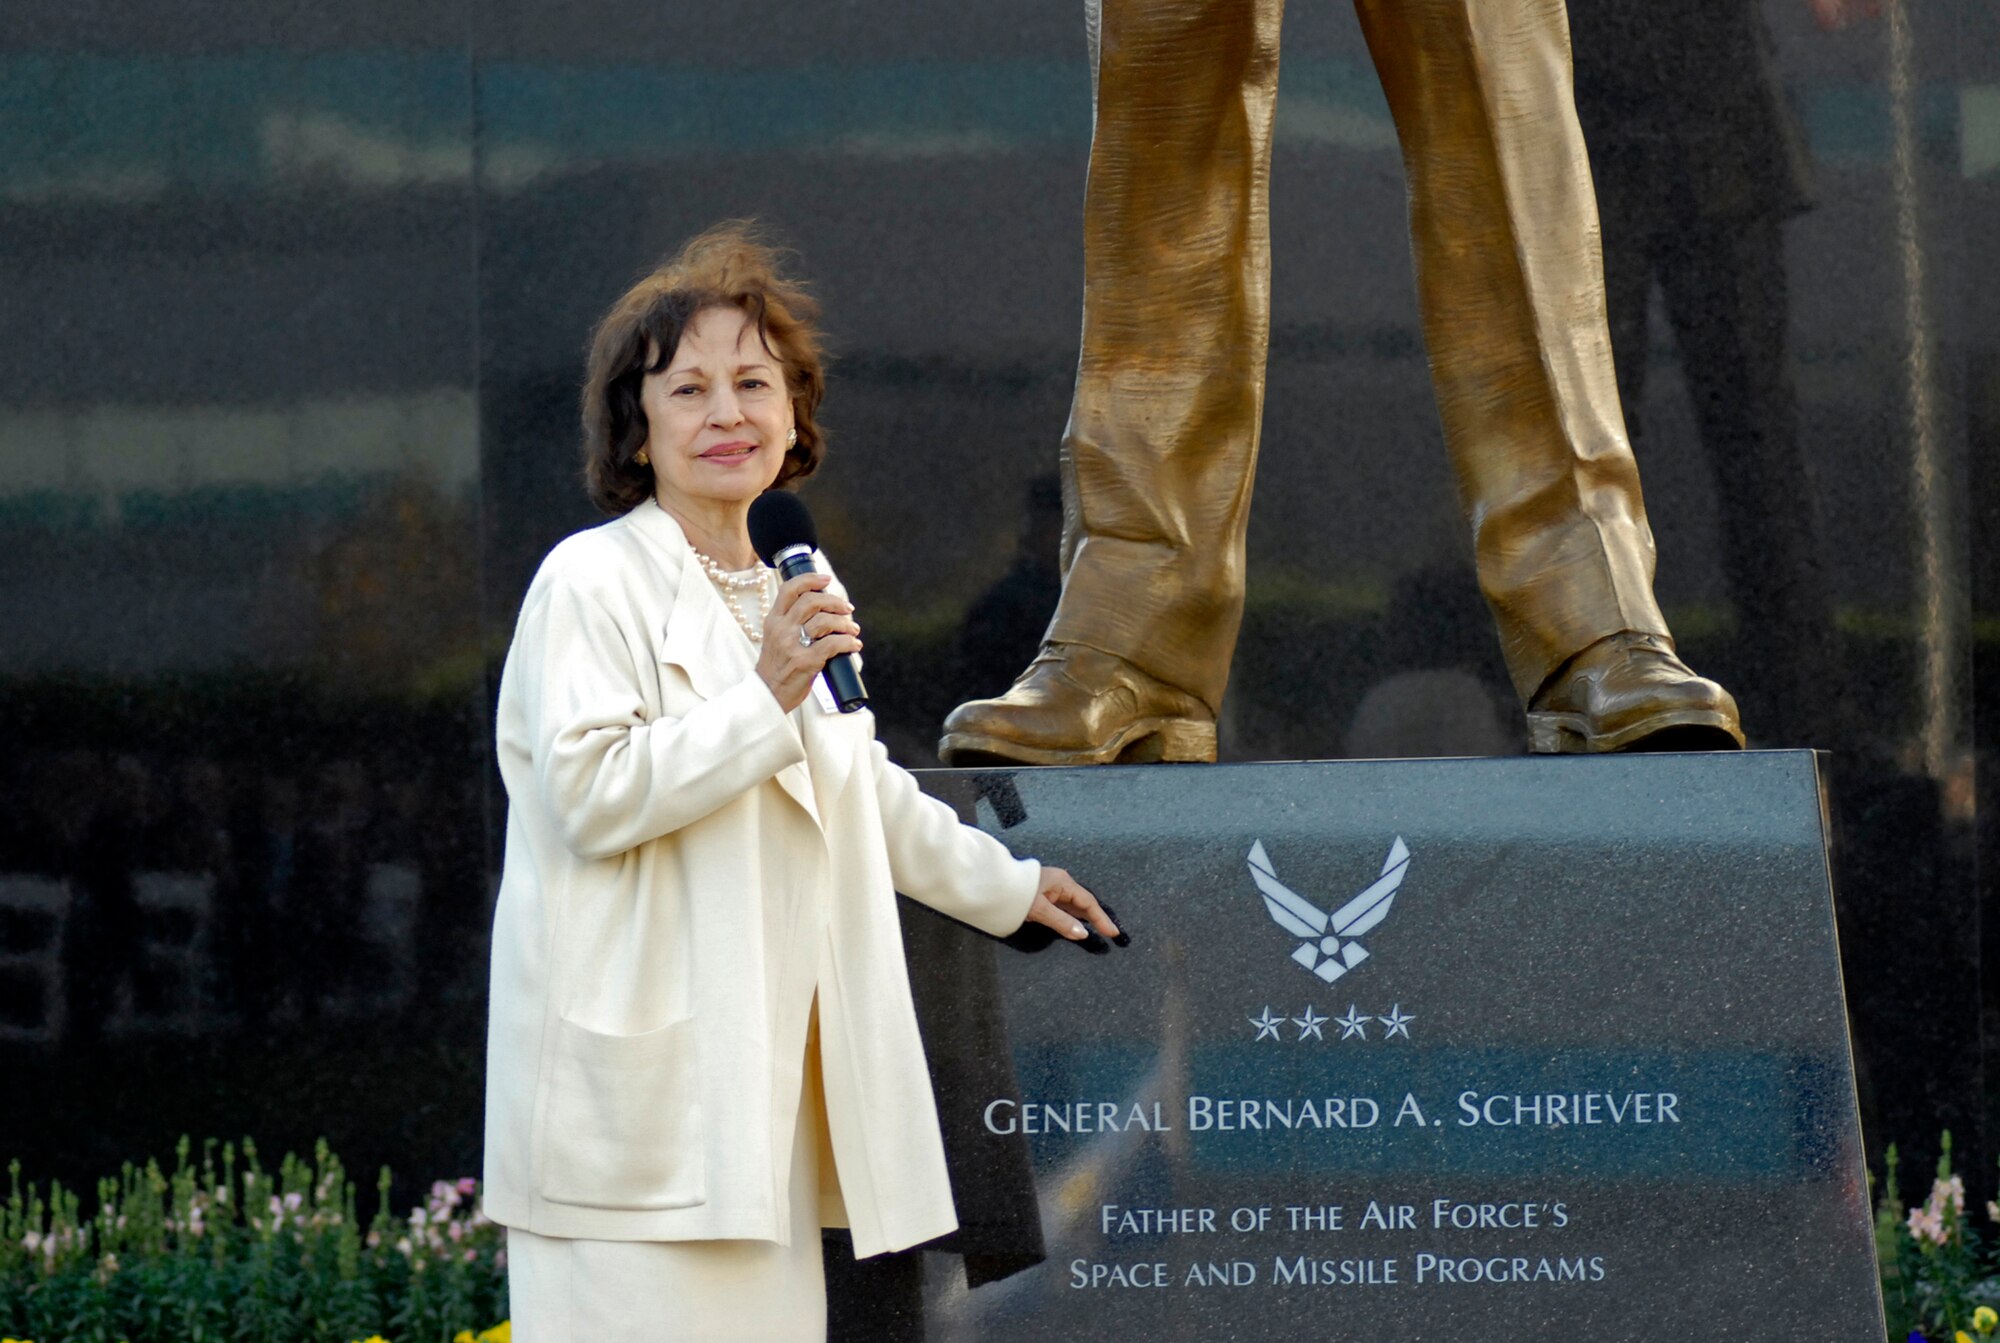 General Bernard A. Schriever’s widow Joni James spoke fondly about her late husband at a ceremony here to dedicate a memorial to the general, Nov. 15.  General Schriever is considered the father of the Air Force’s space and missile program. The statue was donated to SMC by the Air Force Association’s Schriever Chapter. (Photo by Lou Hernandez)